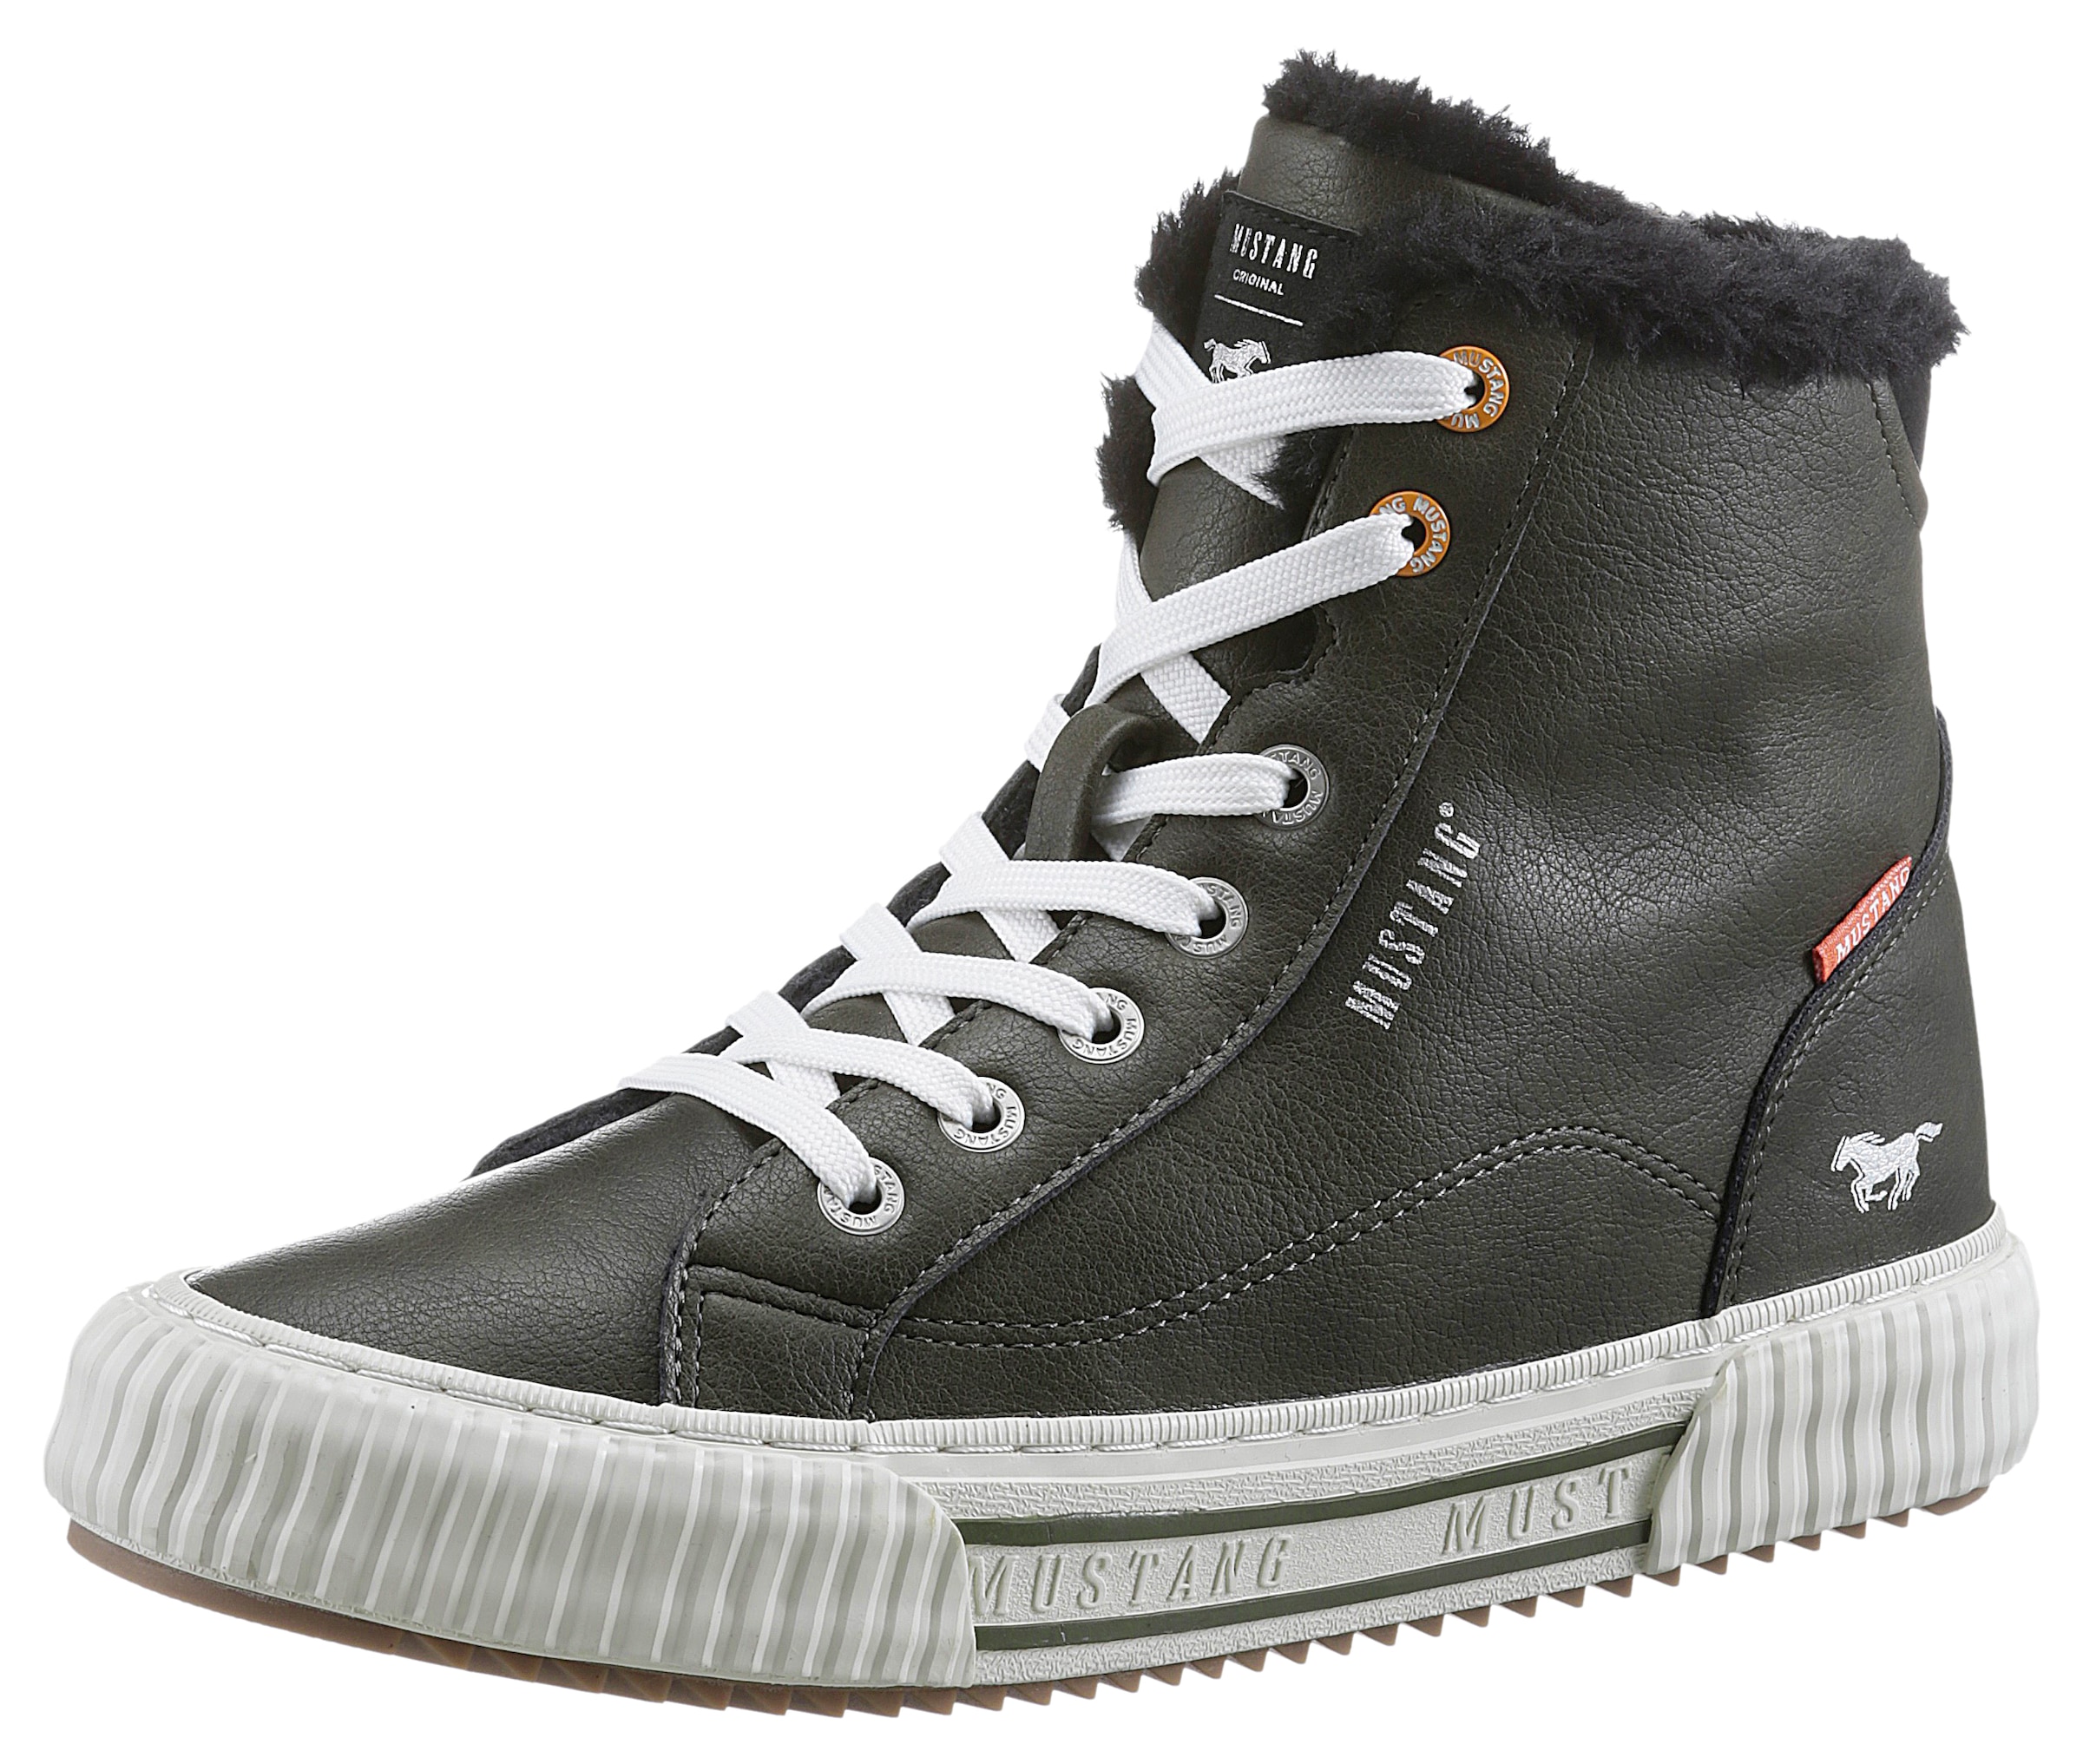 mit ♕ Shoes bei Plateausohle Mustang Winterboots,